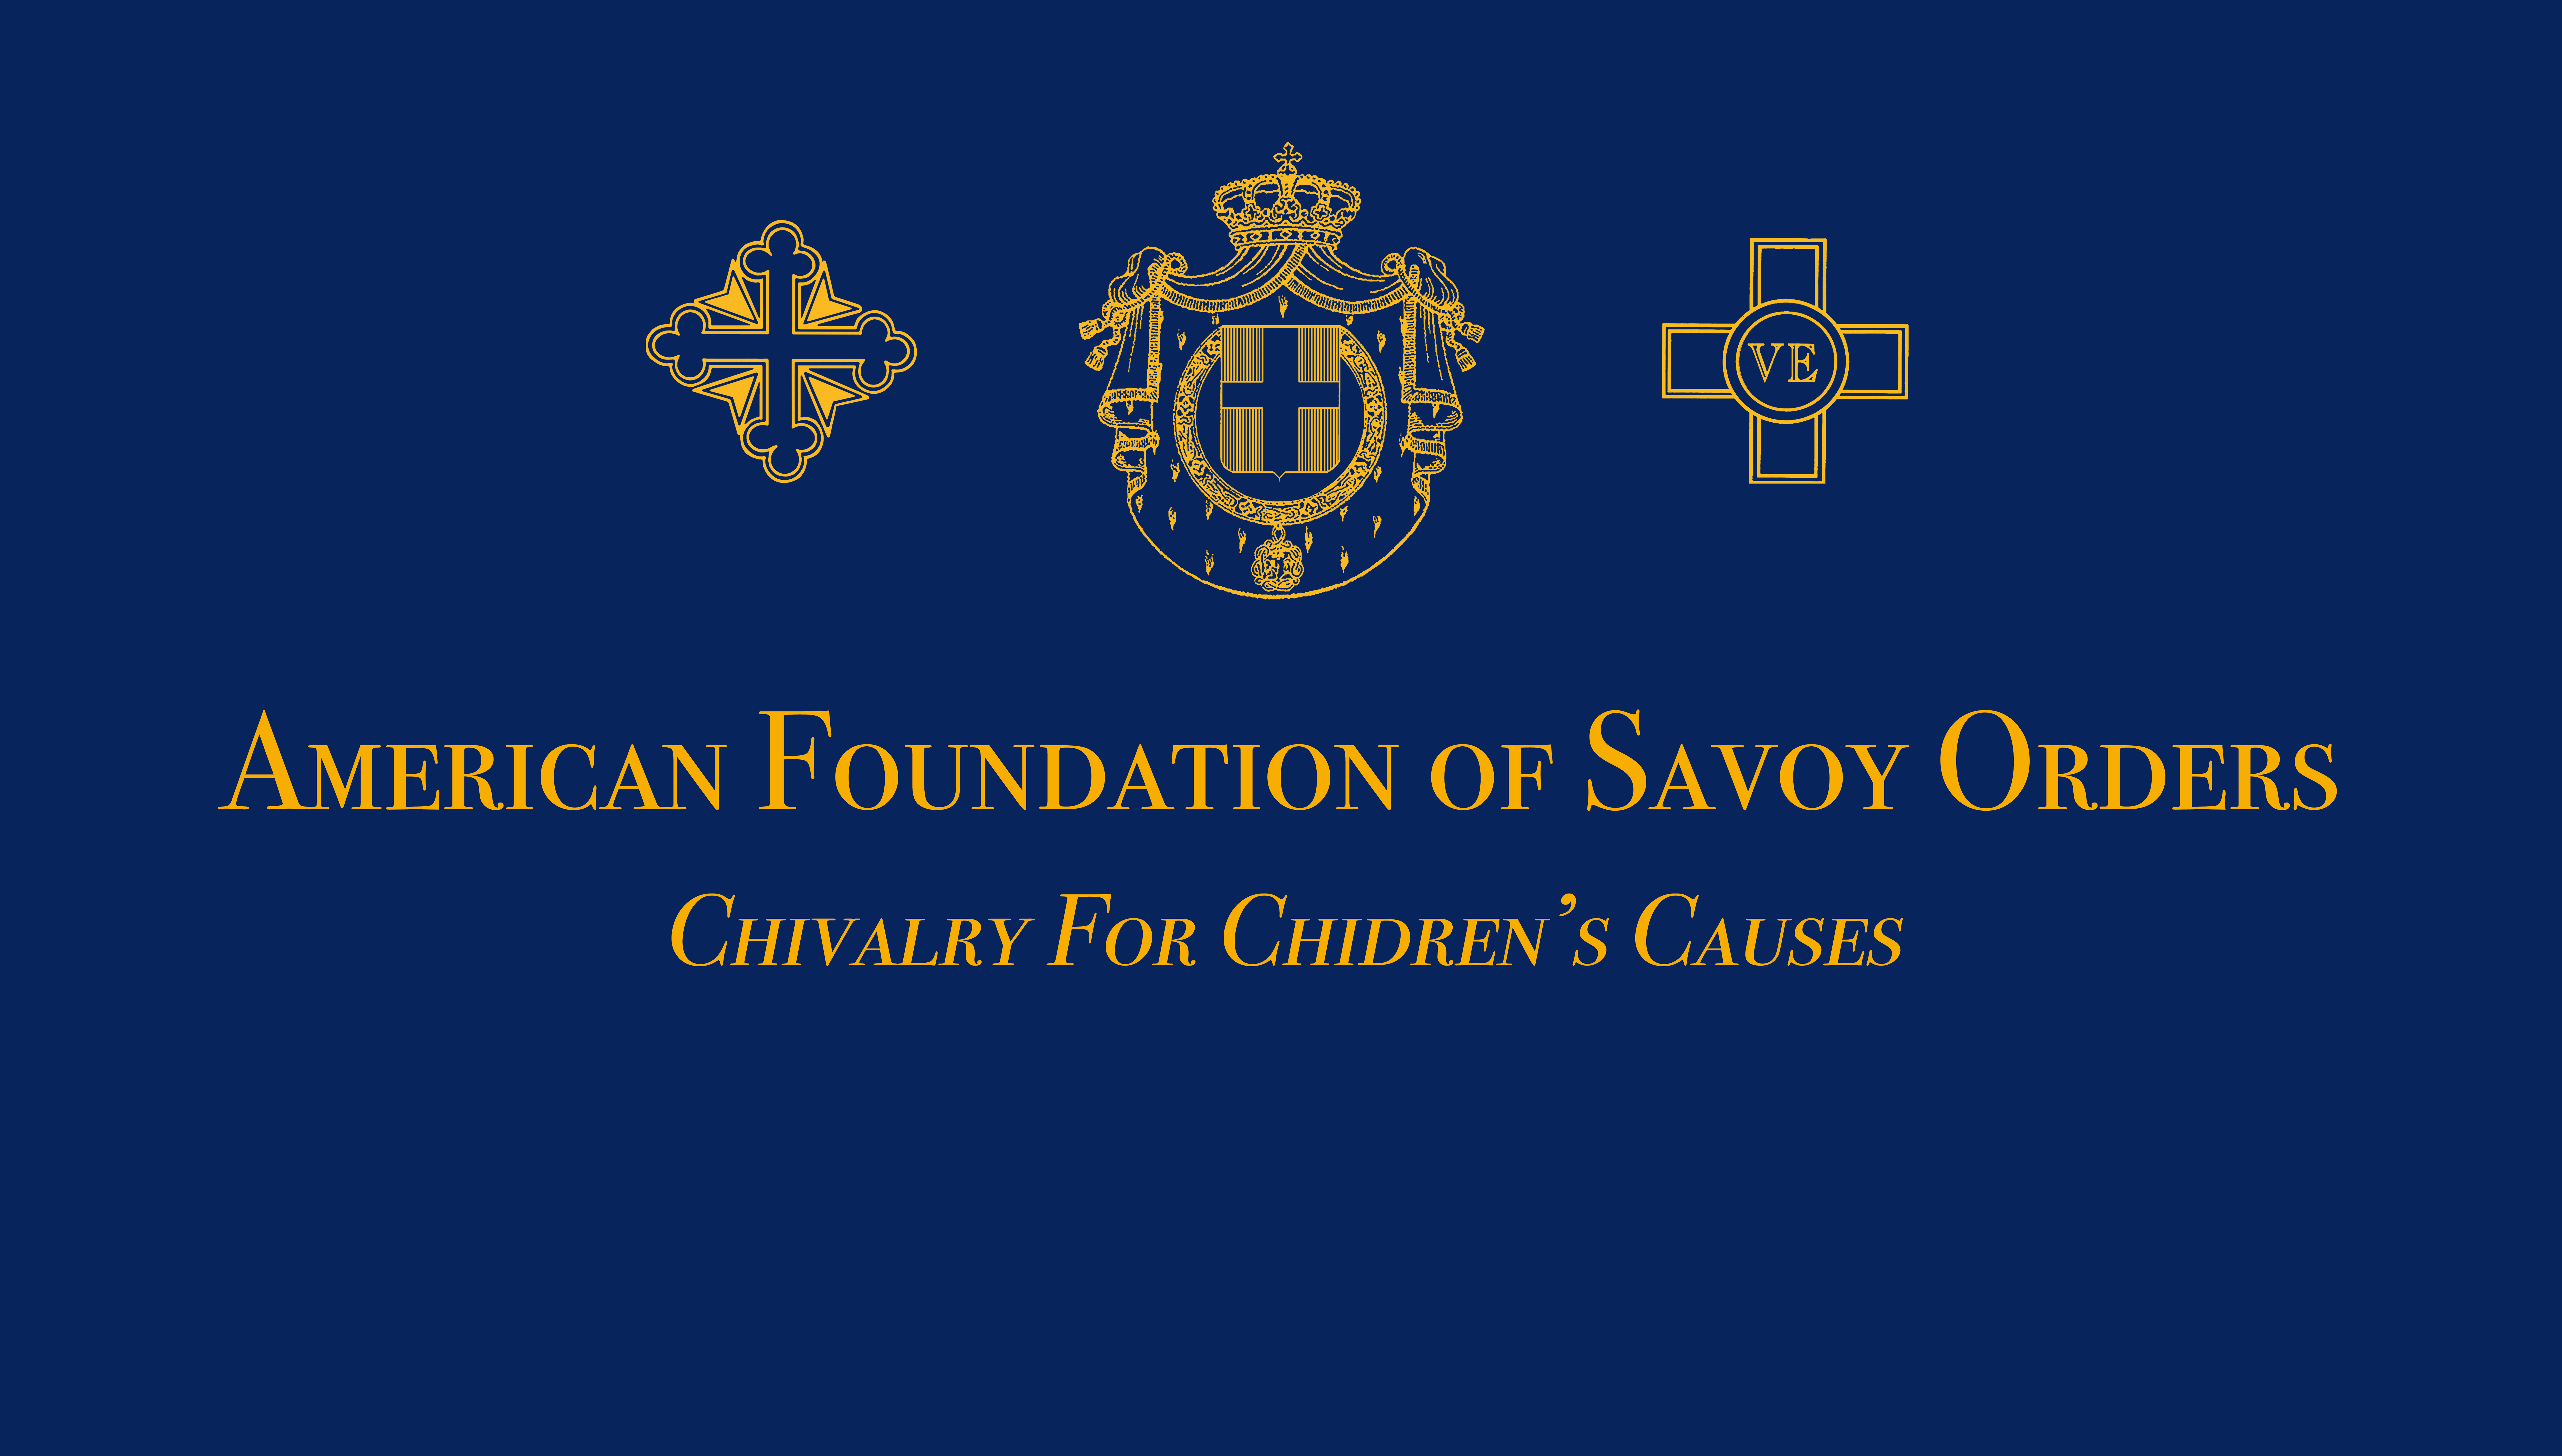 The American Foundation of Savoy Orders - Chivalry For Children's Causes™